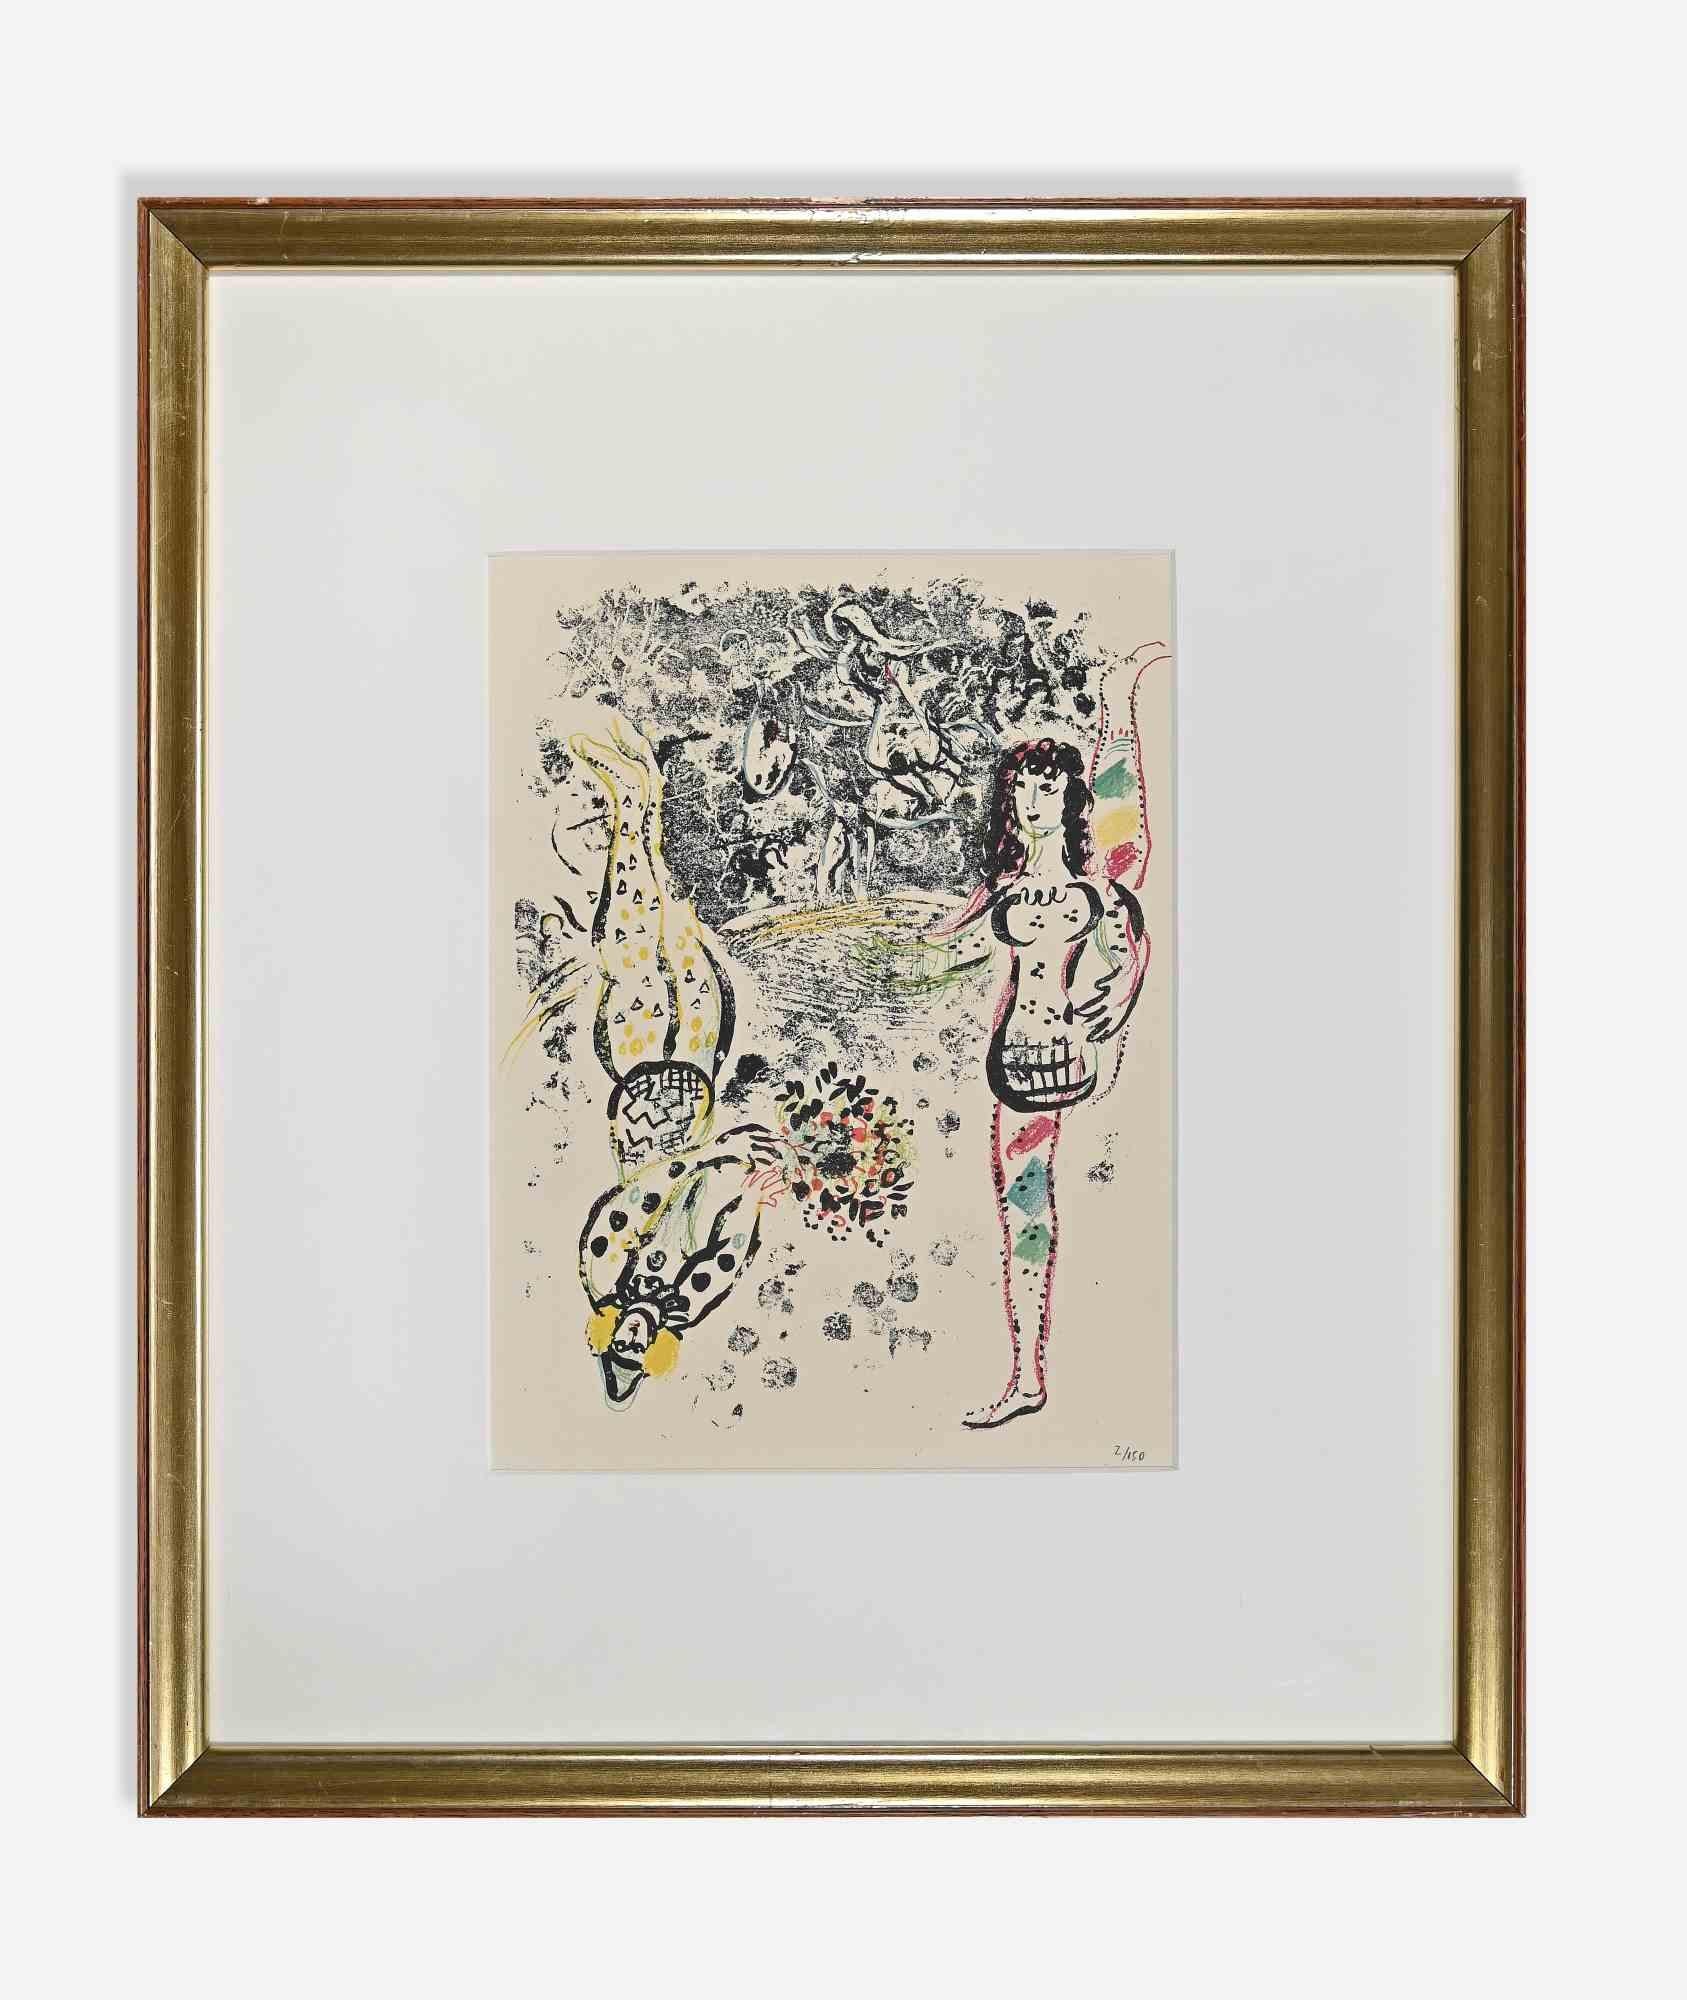 Le Jeu des Acrobates is a contemporary artwork realized after Marc Chagall in 1963.

Mixed colored lithograph from "Lithographe II", Deluxe edition of 1963.

Numbered on the lower right. Edition of 2/150 copies on handmade paper.

Printed by Atelier